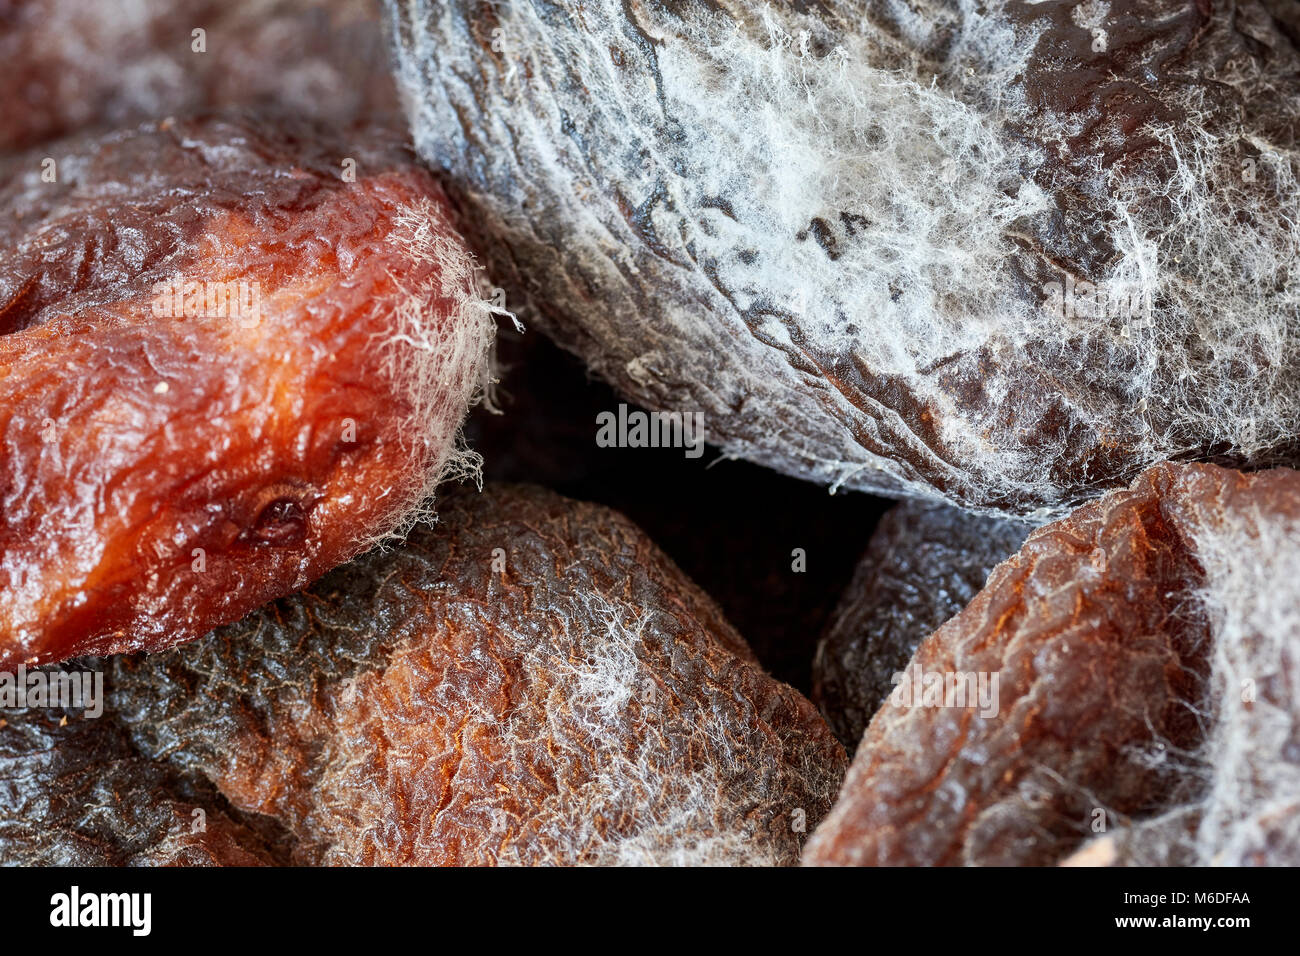 Extreme close up picture of moldy dried apricots, shallow depth of field. Stock Photo